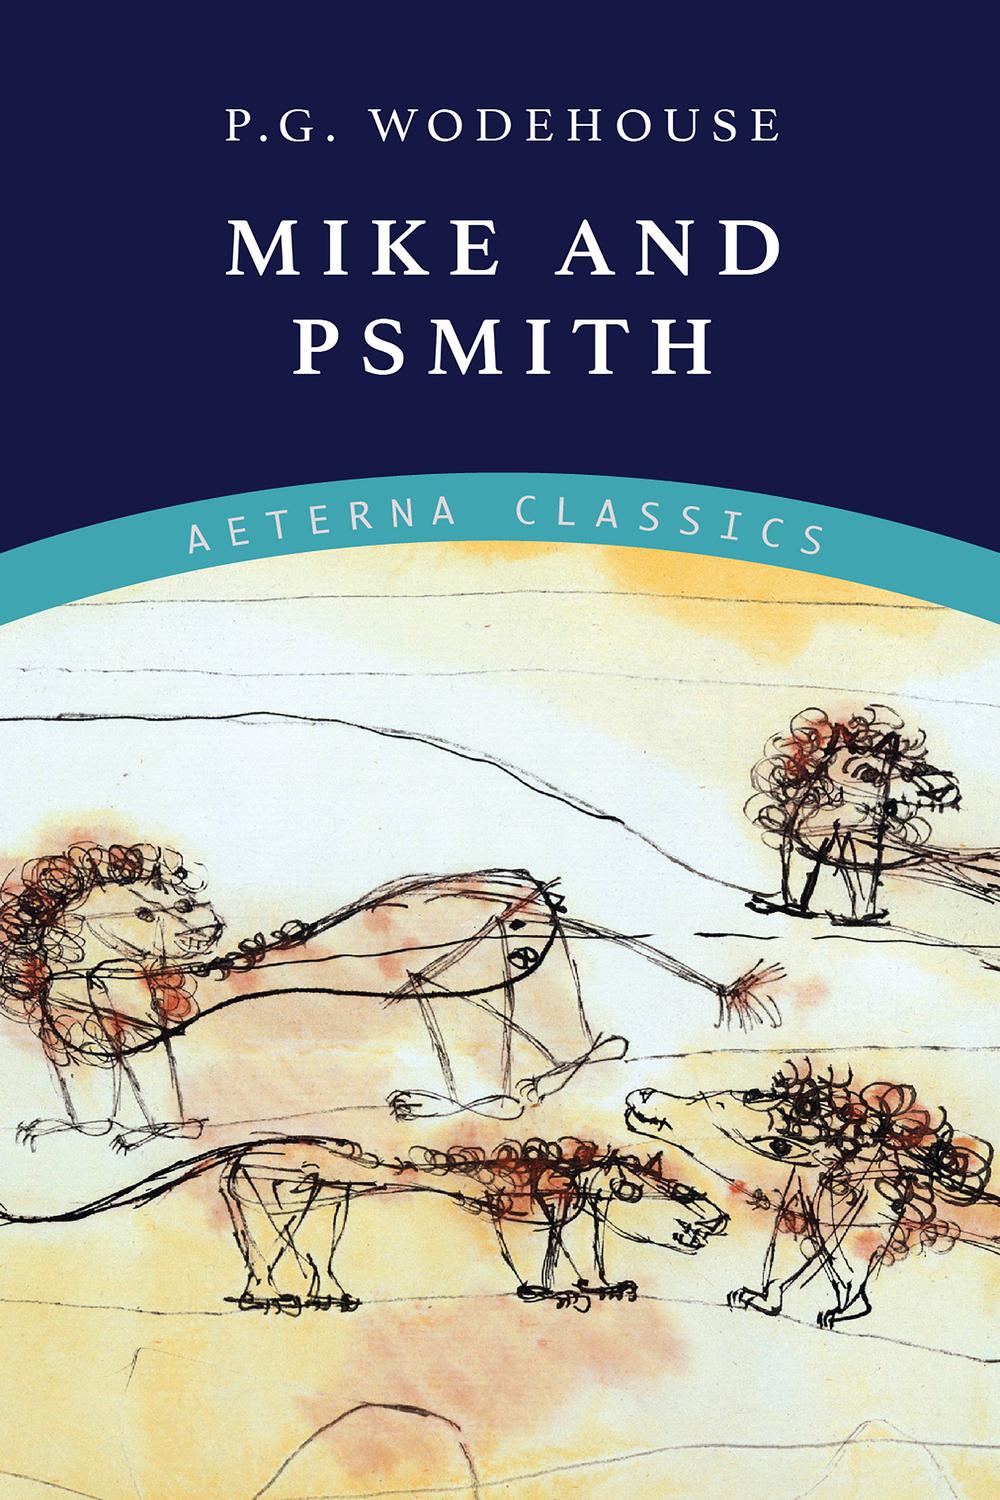 Mike and Psmith - P. G. Wodehouse,,